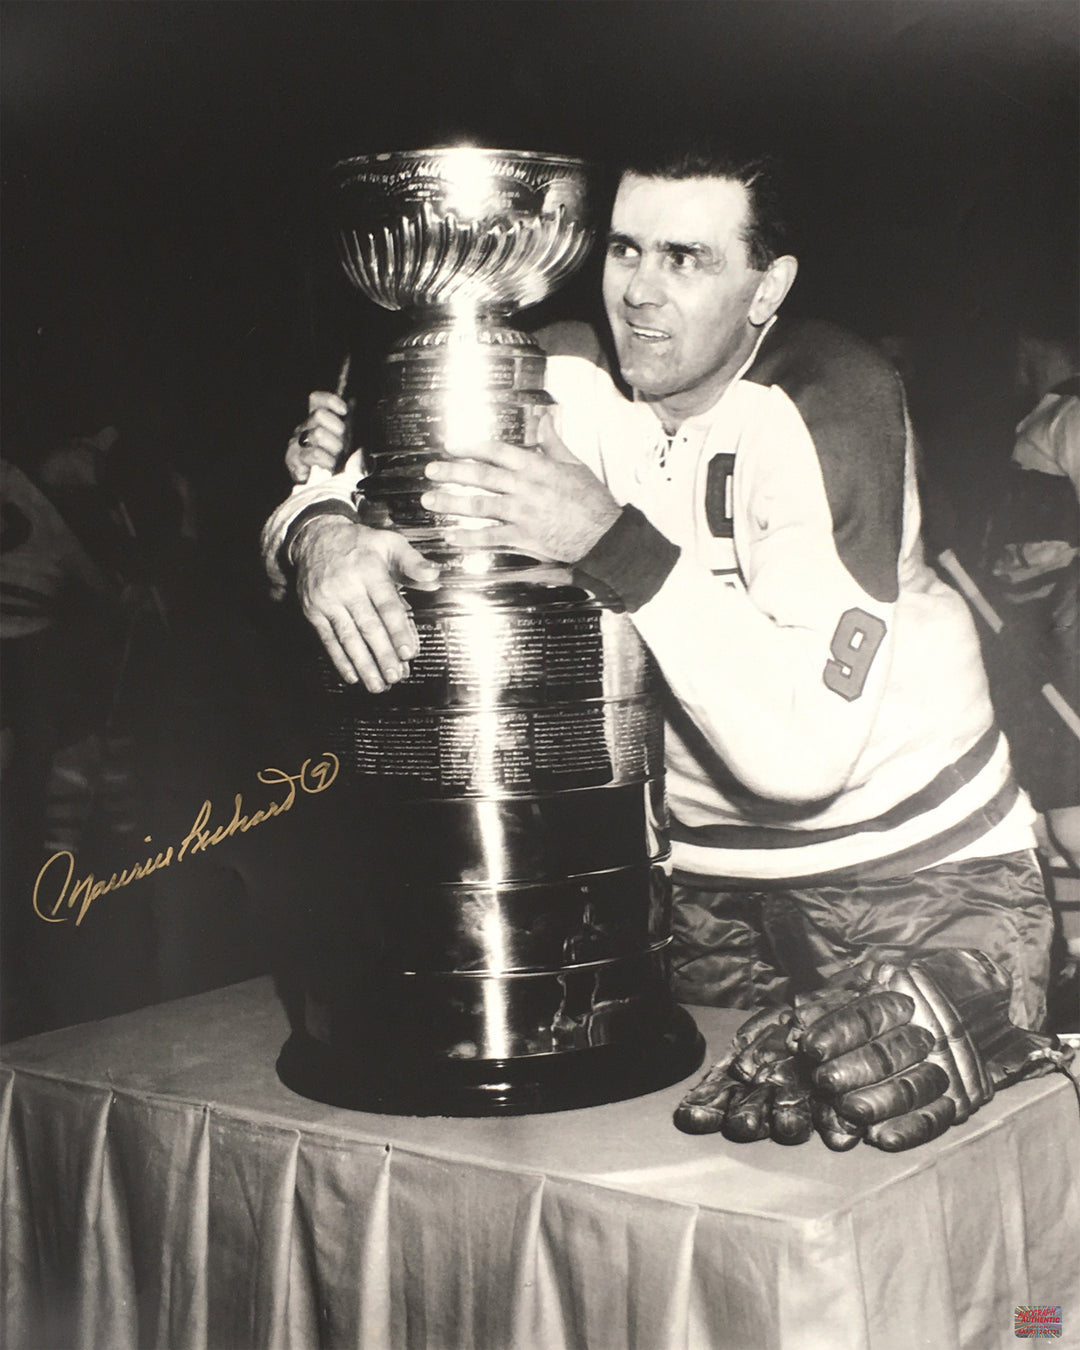 Maurice Richard Signed 16X20 Stanley Cup Photo Montreal Canadiens, Montreal Canadiens, NHL, Hockey, Autographed, Signed, AAHPH31572